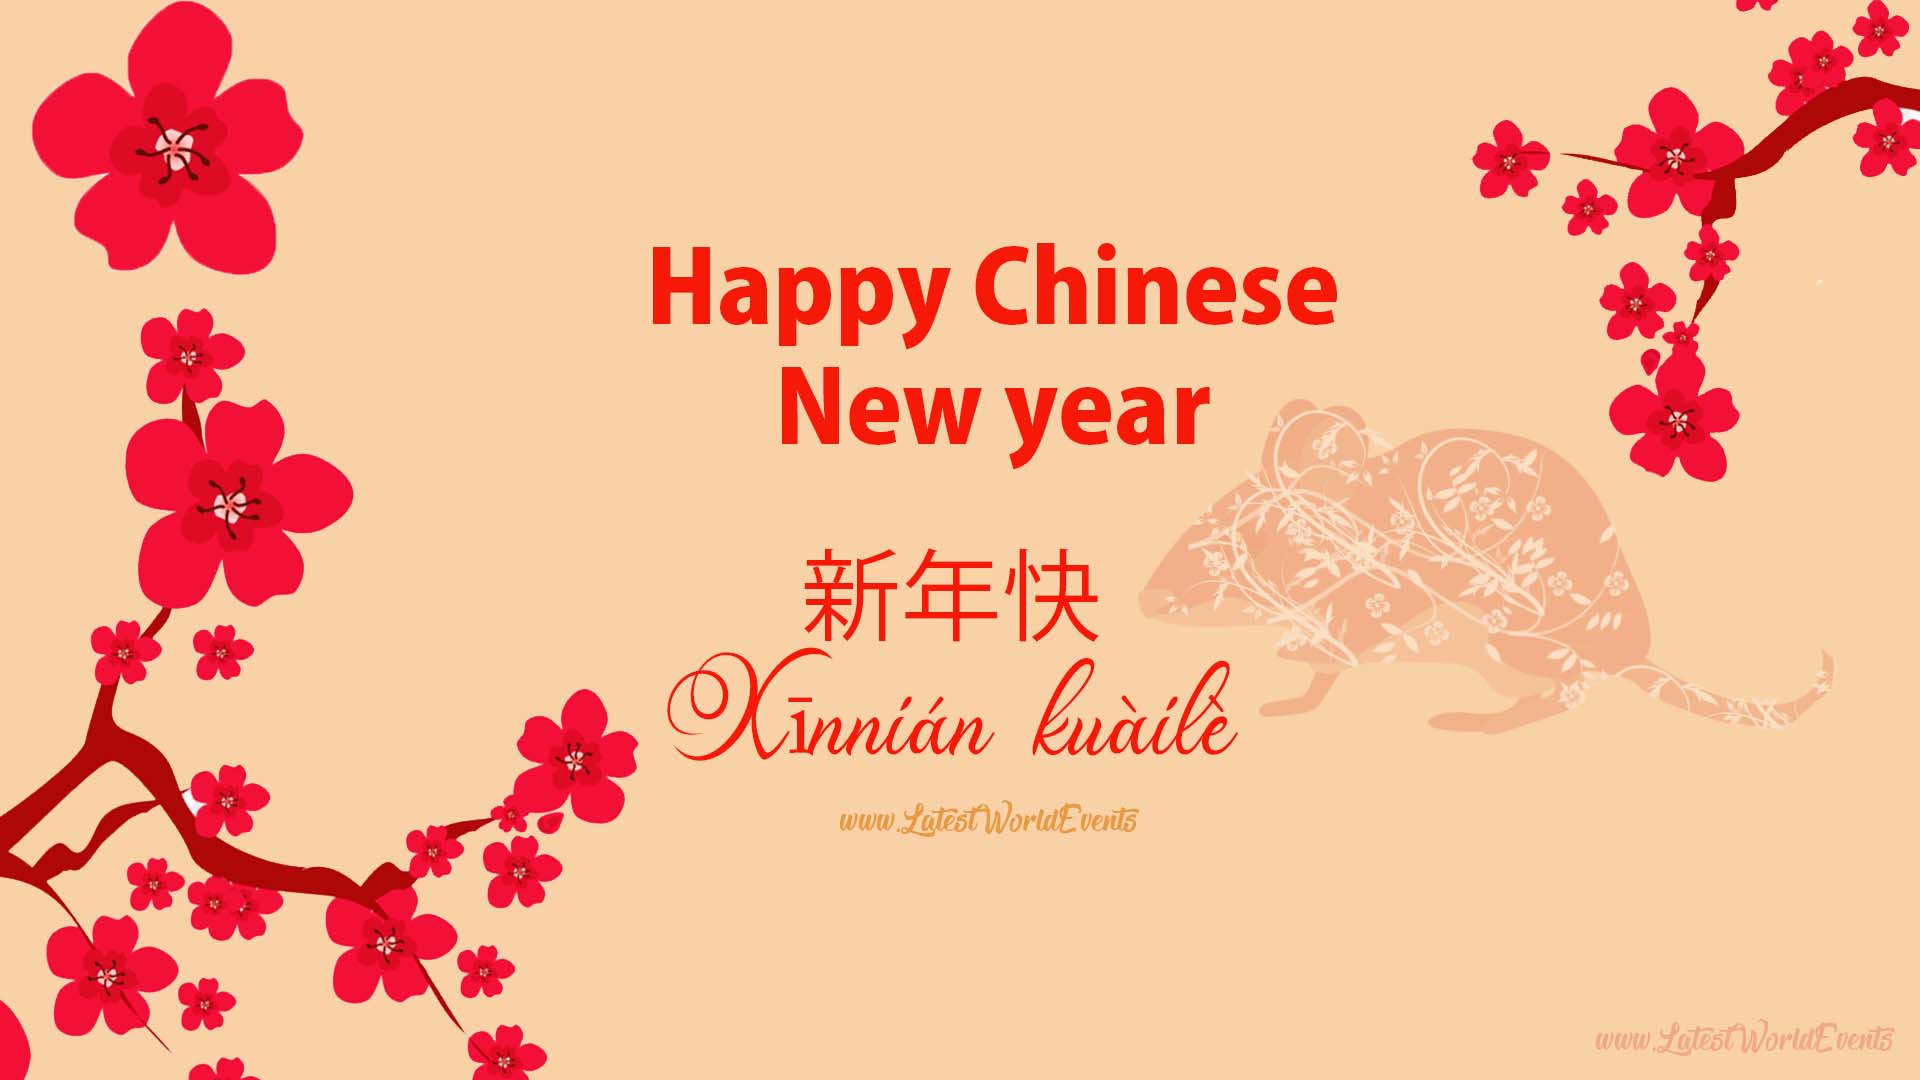 Download-chinese-new-year-card